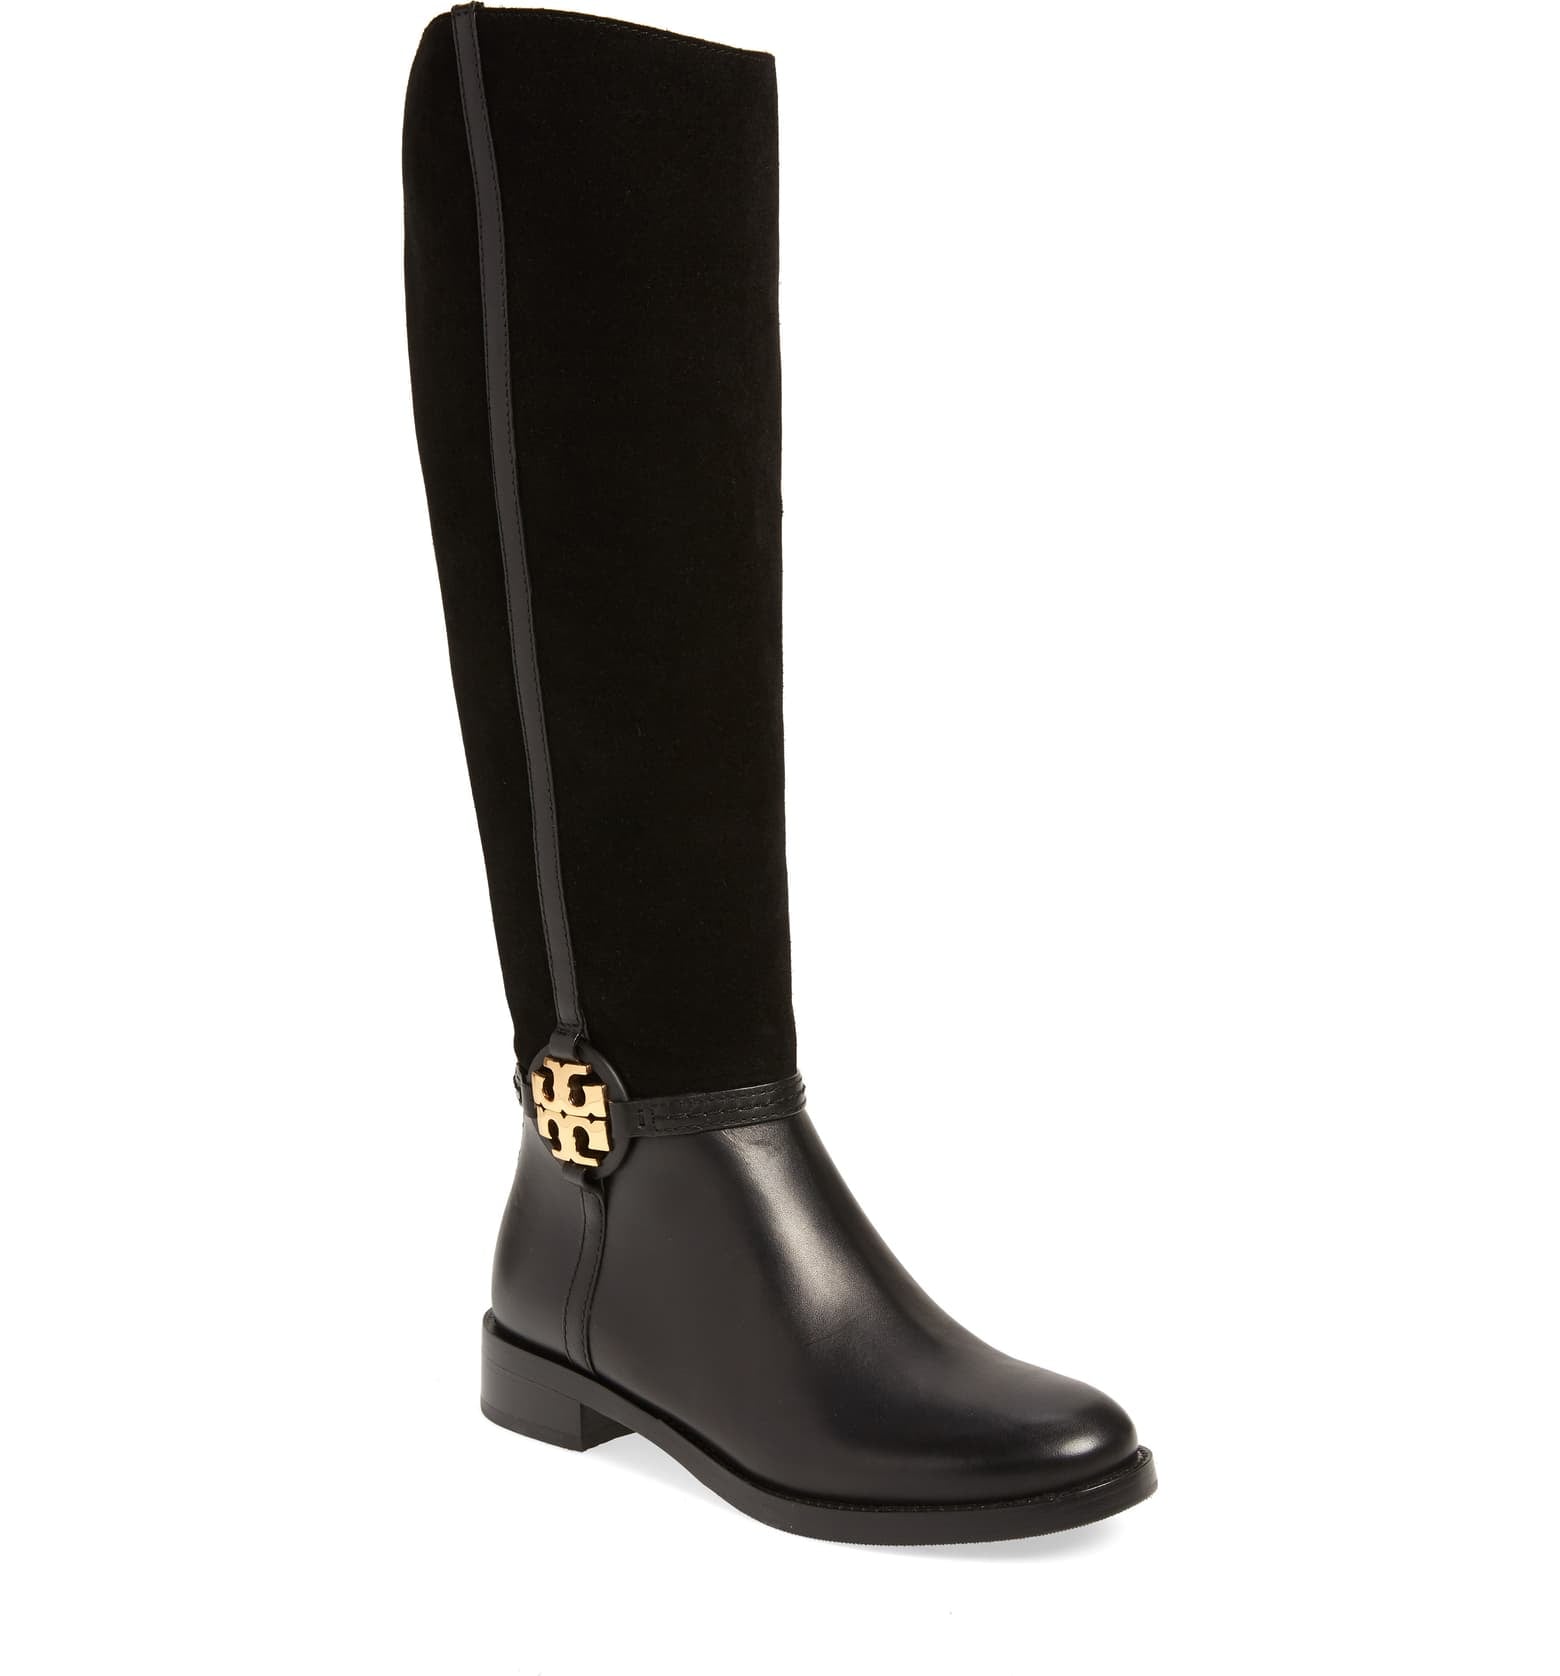 Tory Burch Miller Knee High Boots | From Nike to Jimmy Choo, These 51  Discounted Shoes Are Almost Too Good to Be True | POPSUGAR Fashion Photo 15